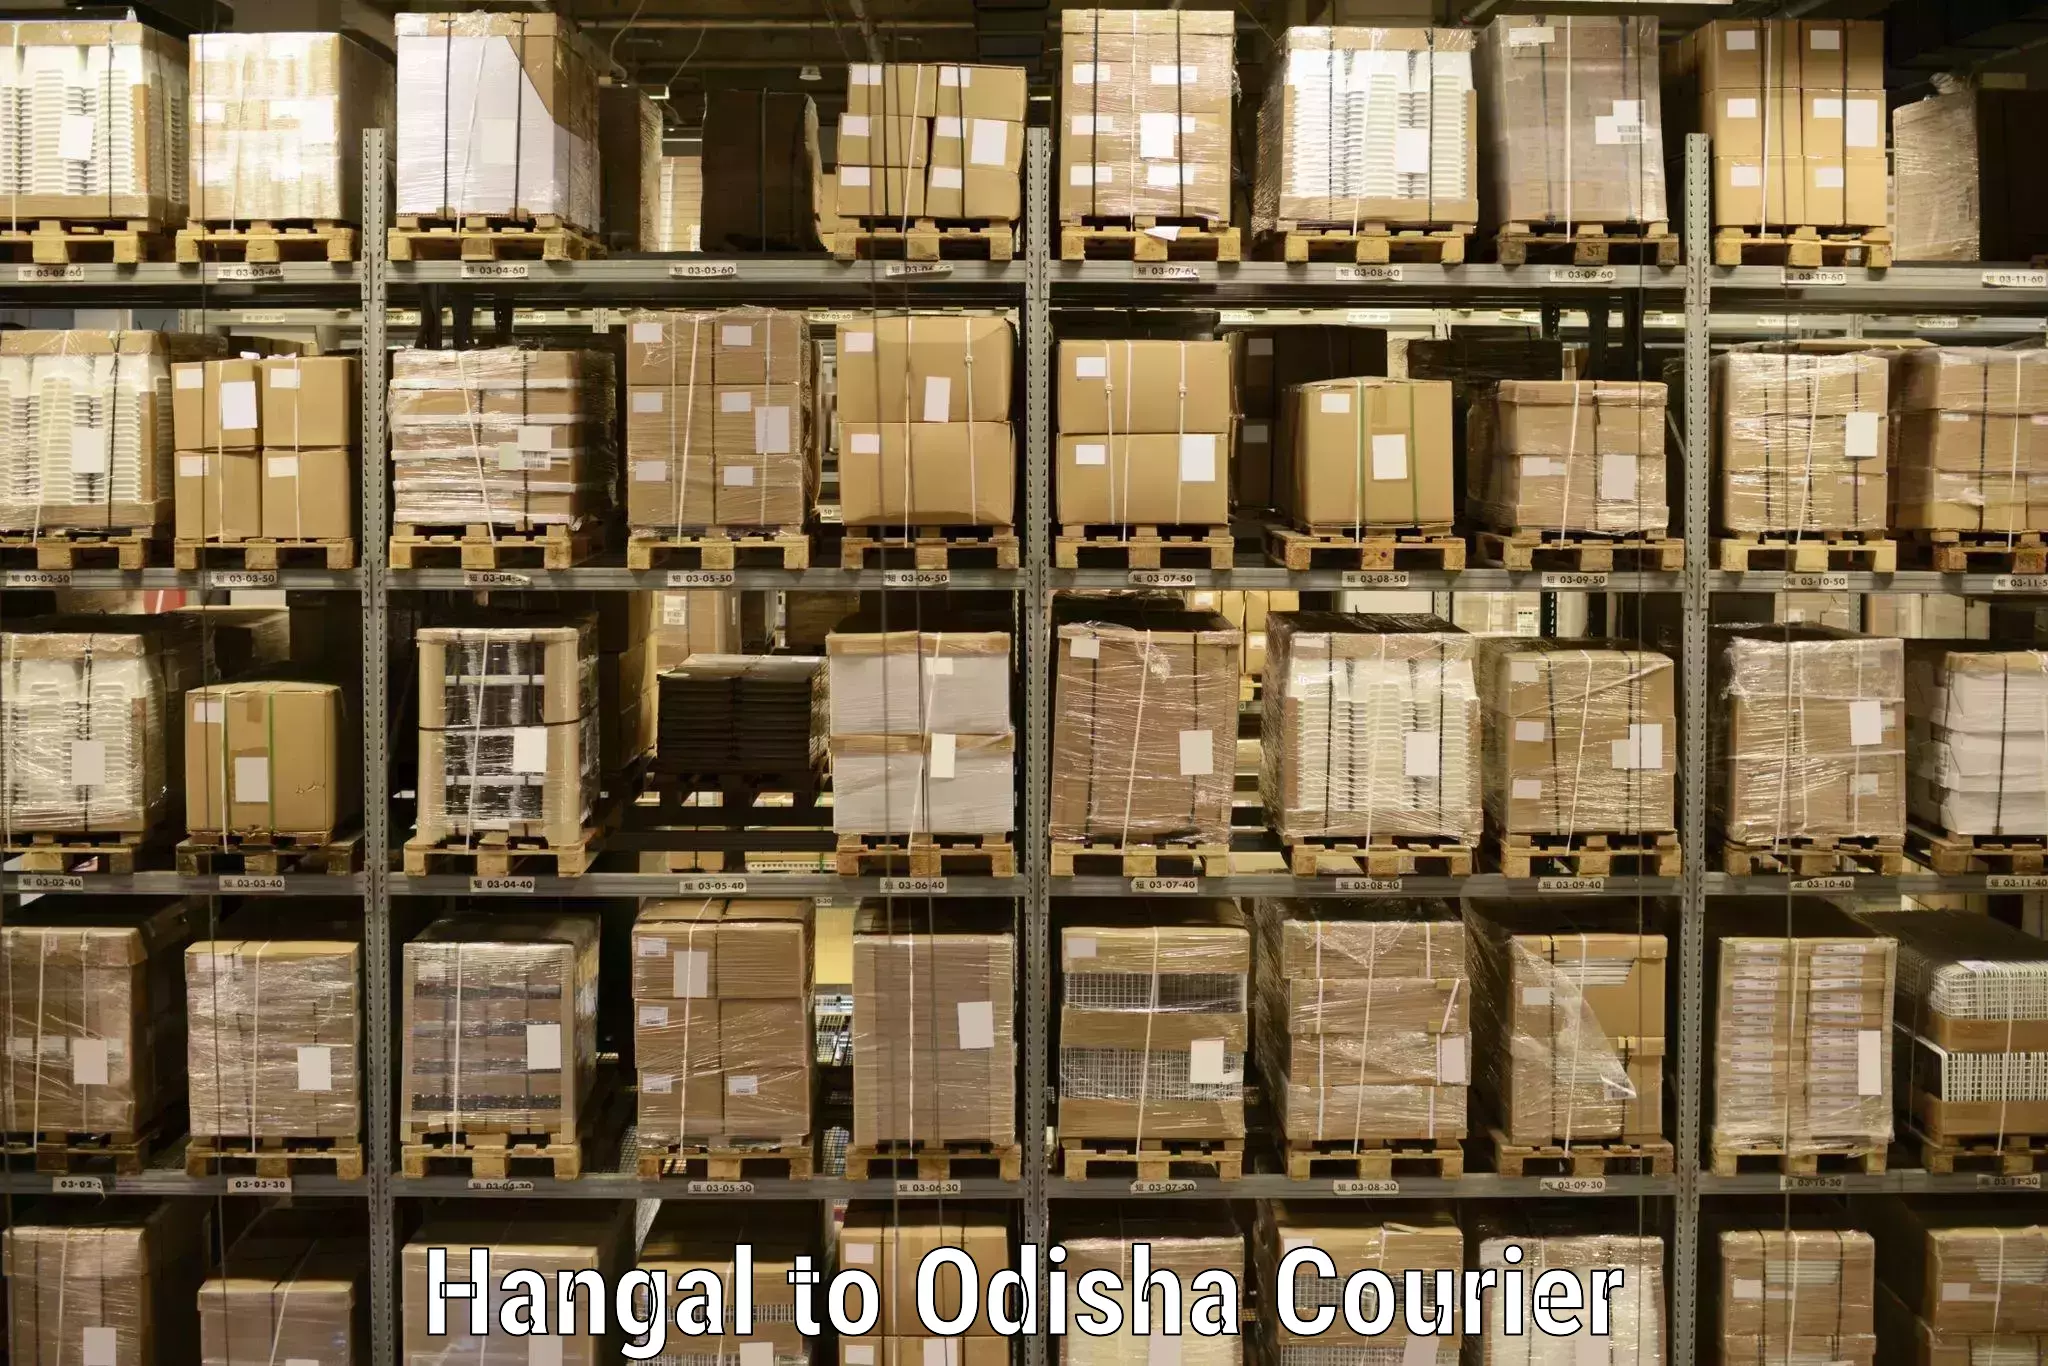 Courier service comparison in Hangal to Soro